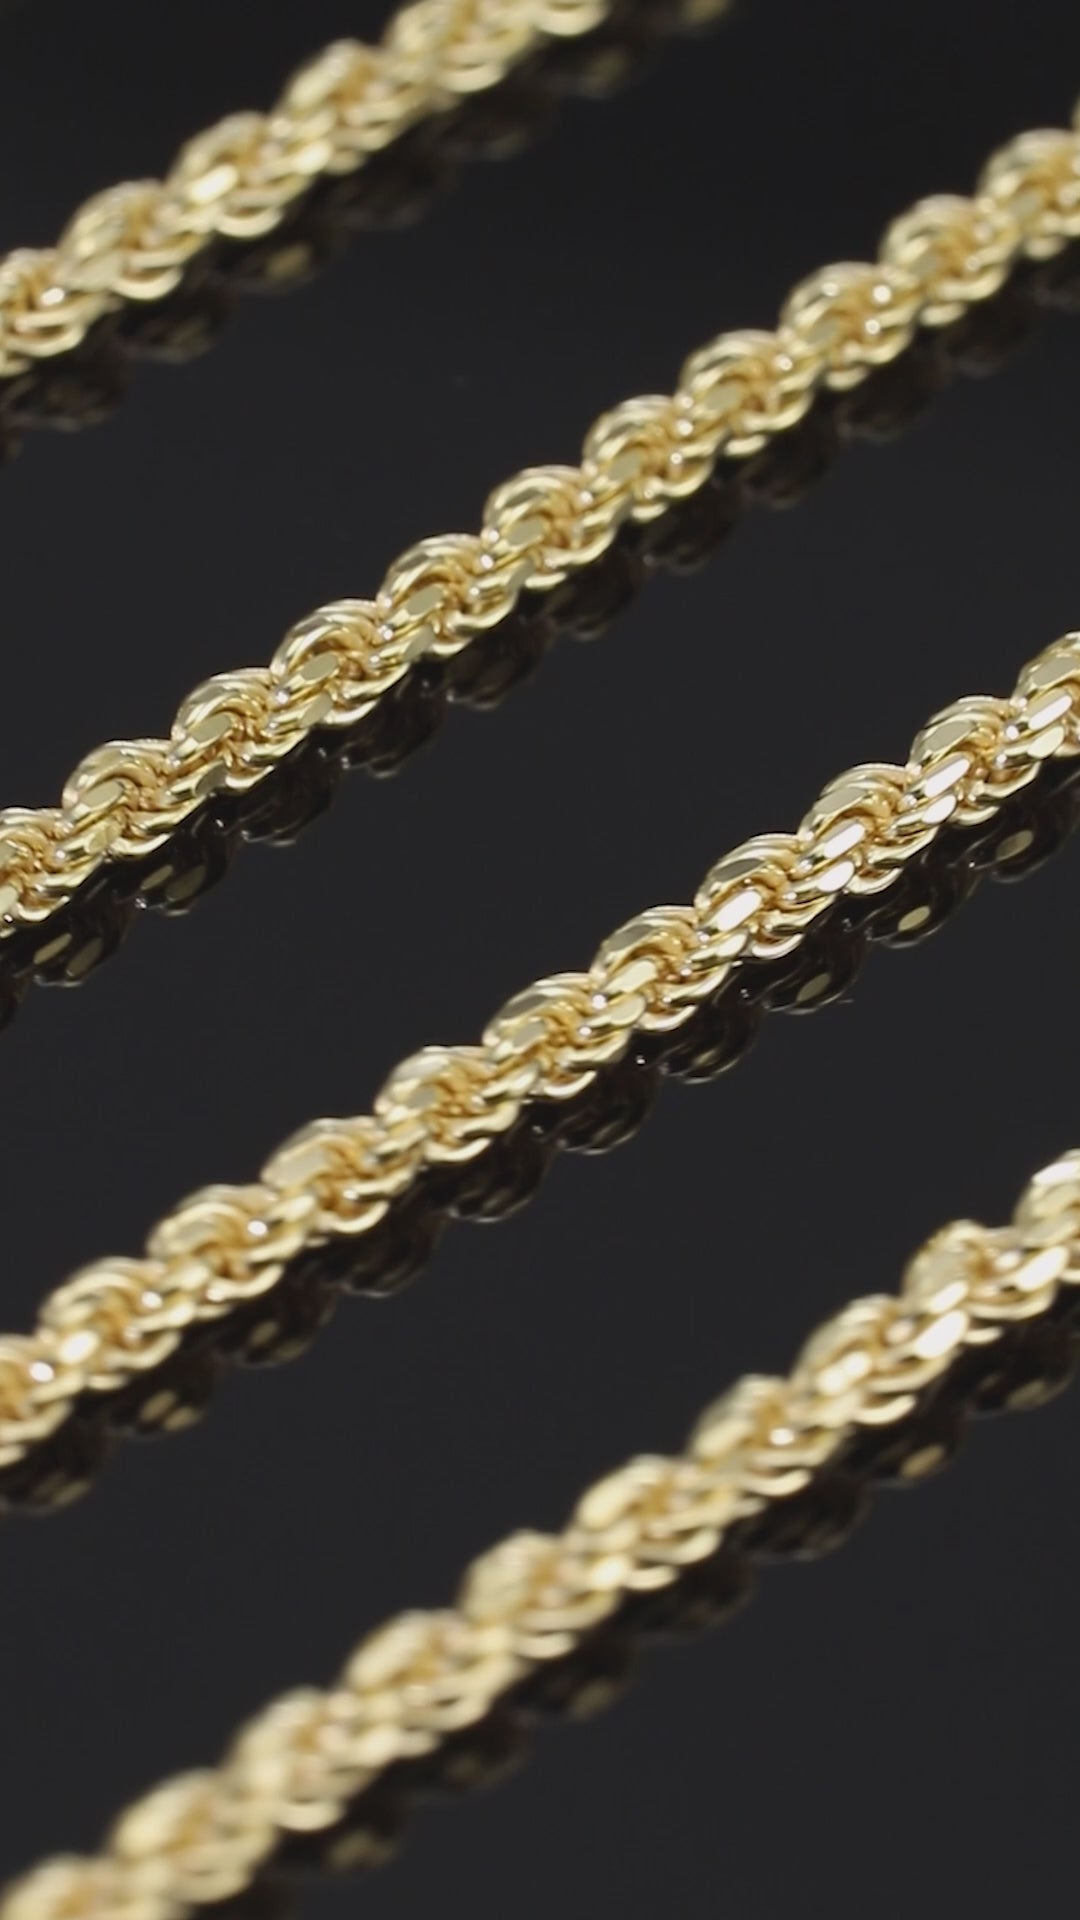 14K Gold Rope Chain, 3mm, 16 long, weighs 11.7 grams